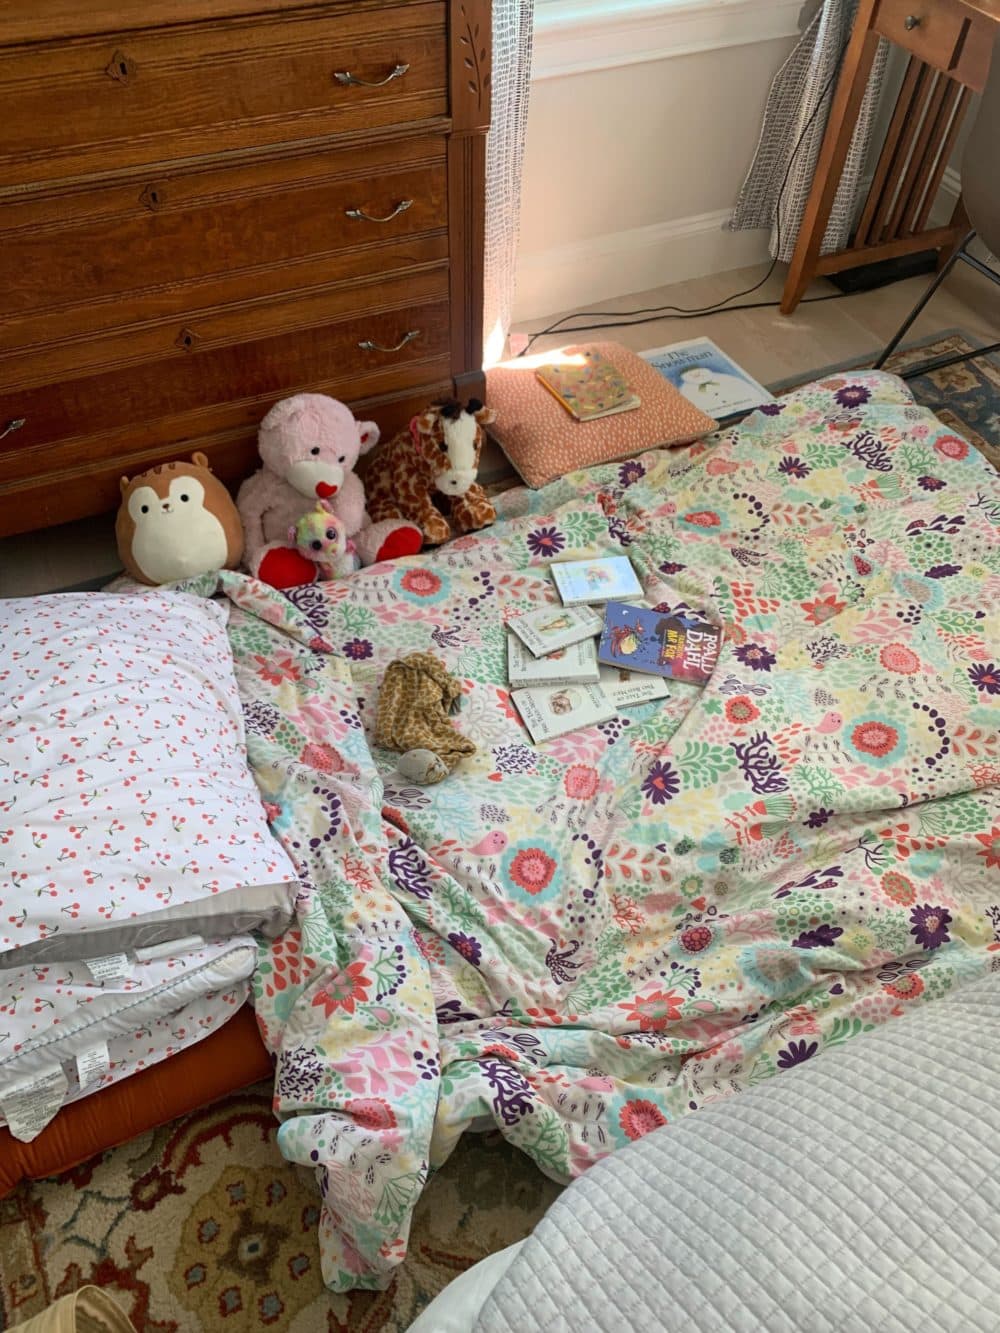 The author's daughter's temporary bed set up, on the floor of the guest room. (Courtesy Cloe Axelson)